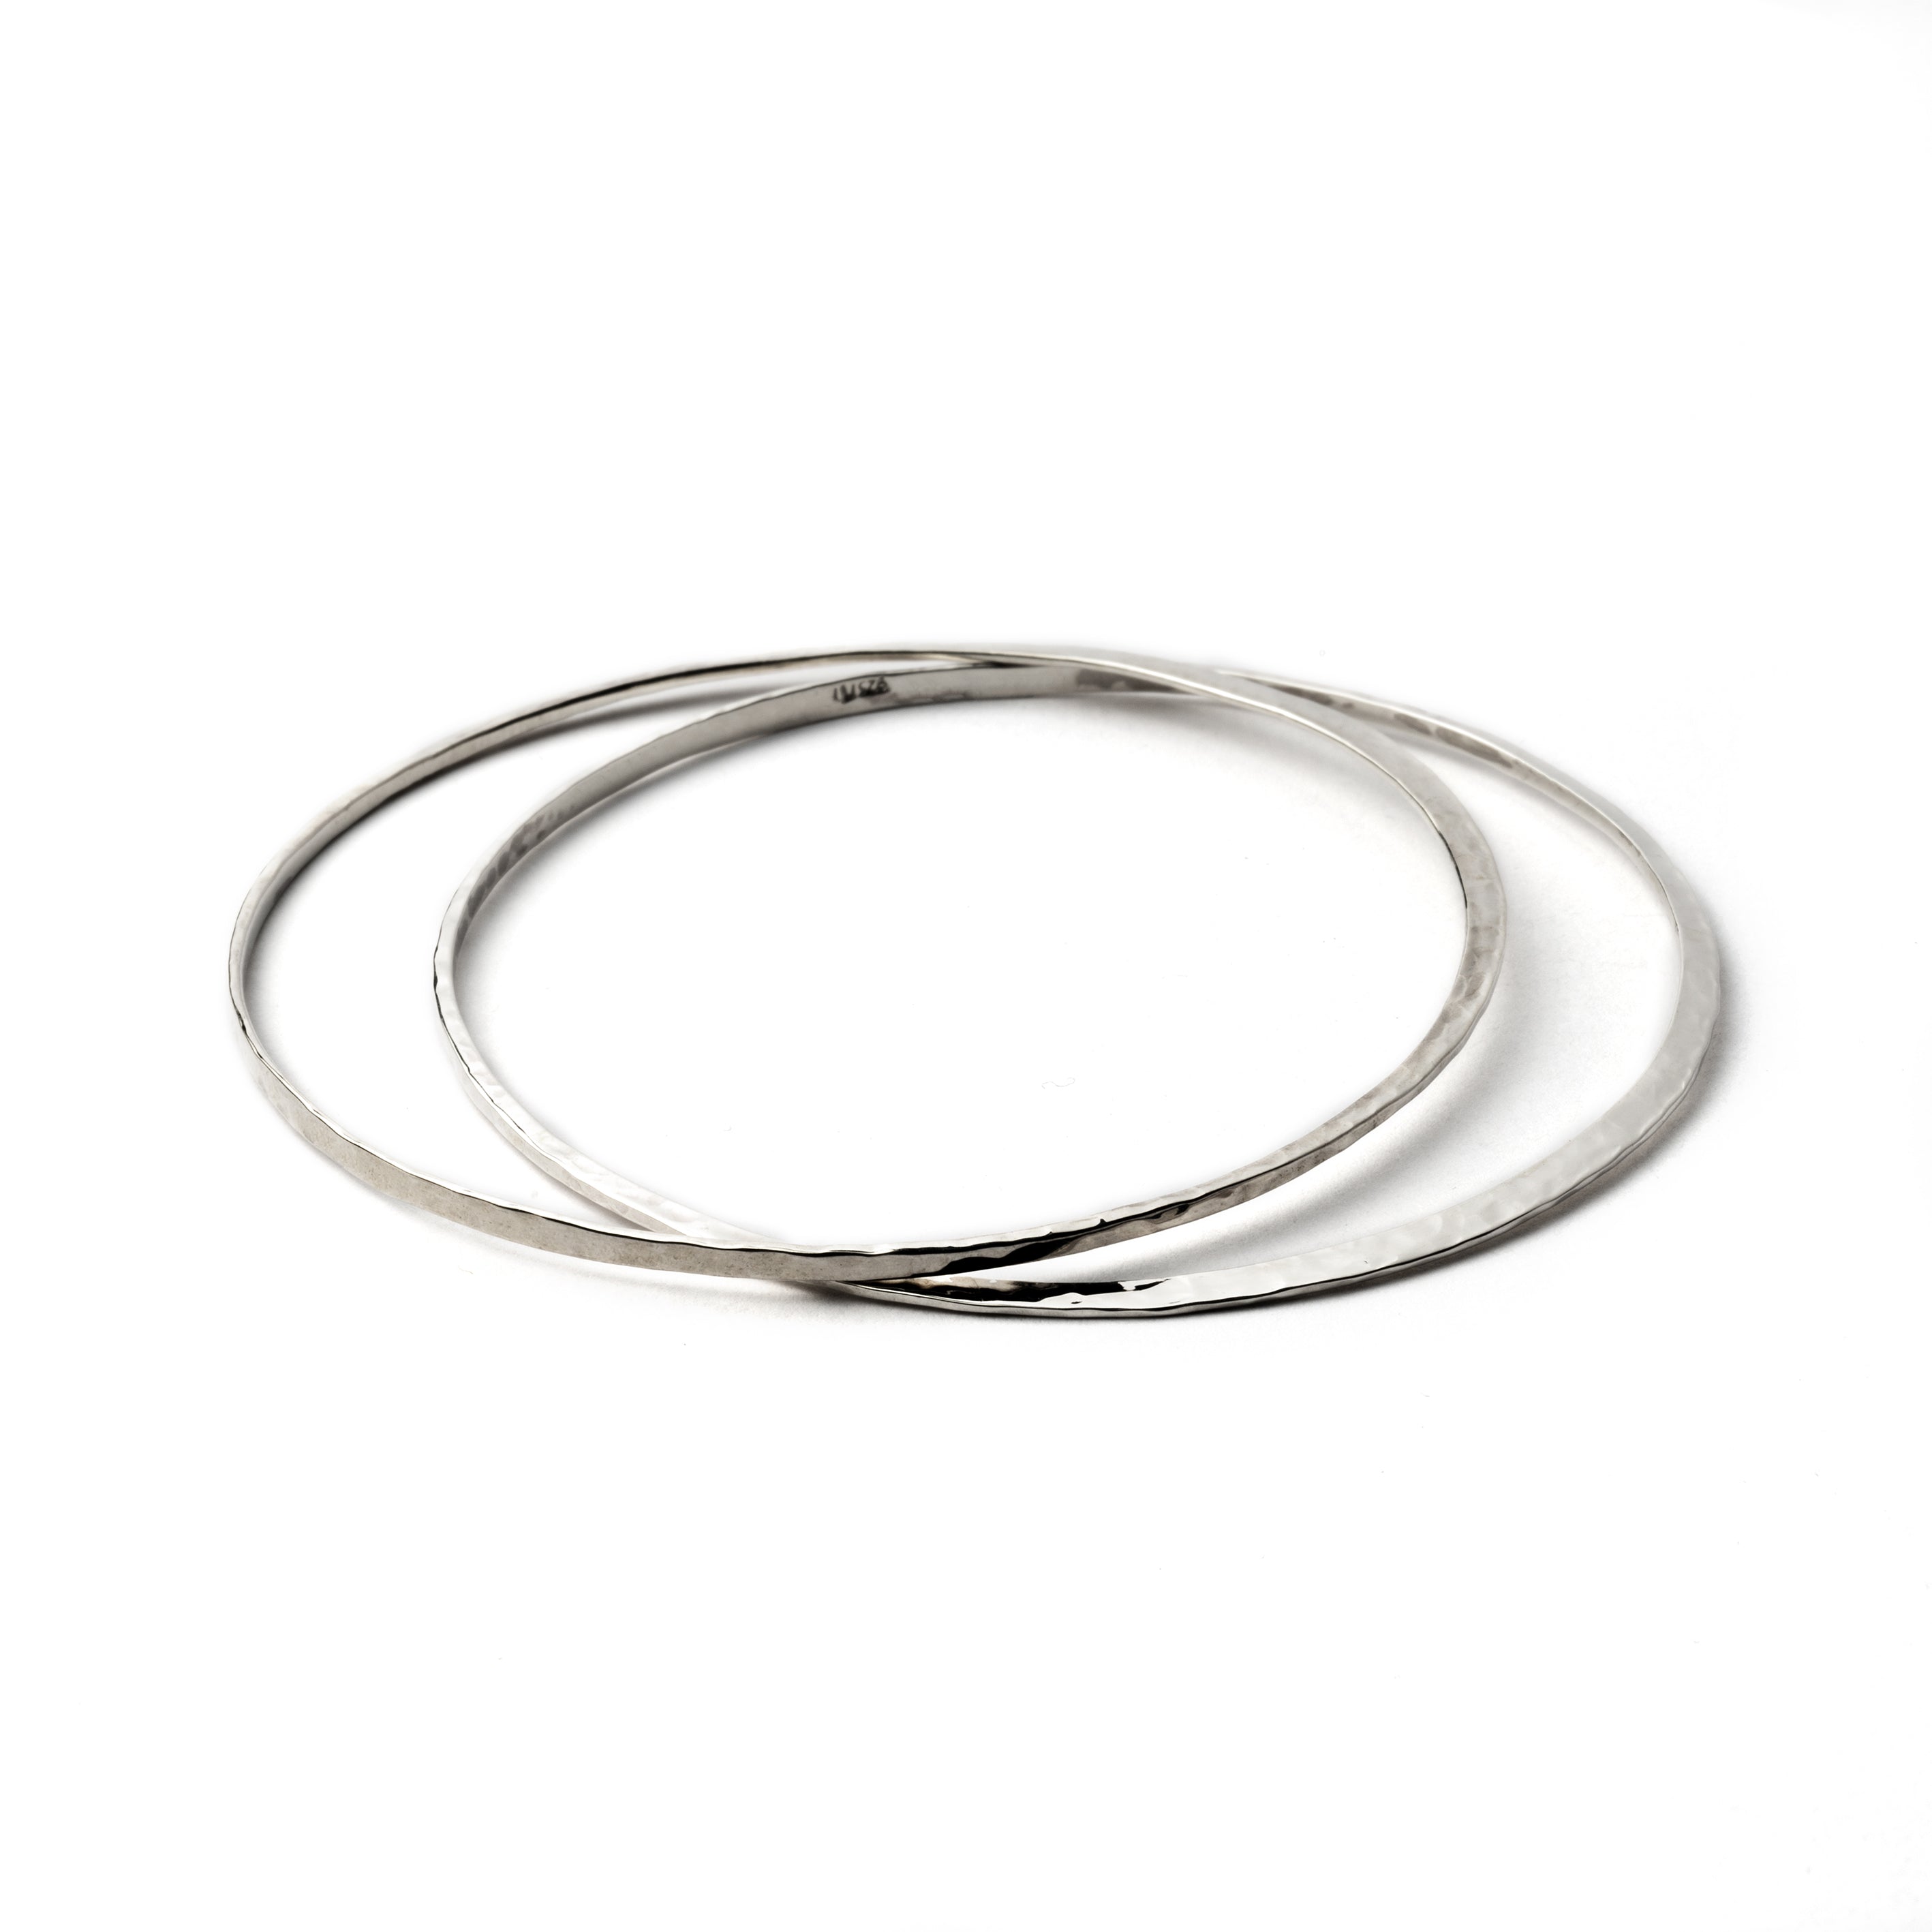 2 Sterling silver hammered flat open bangles